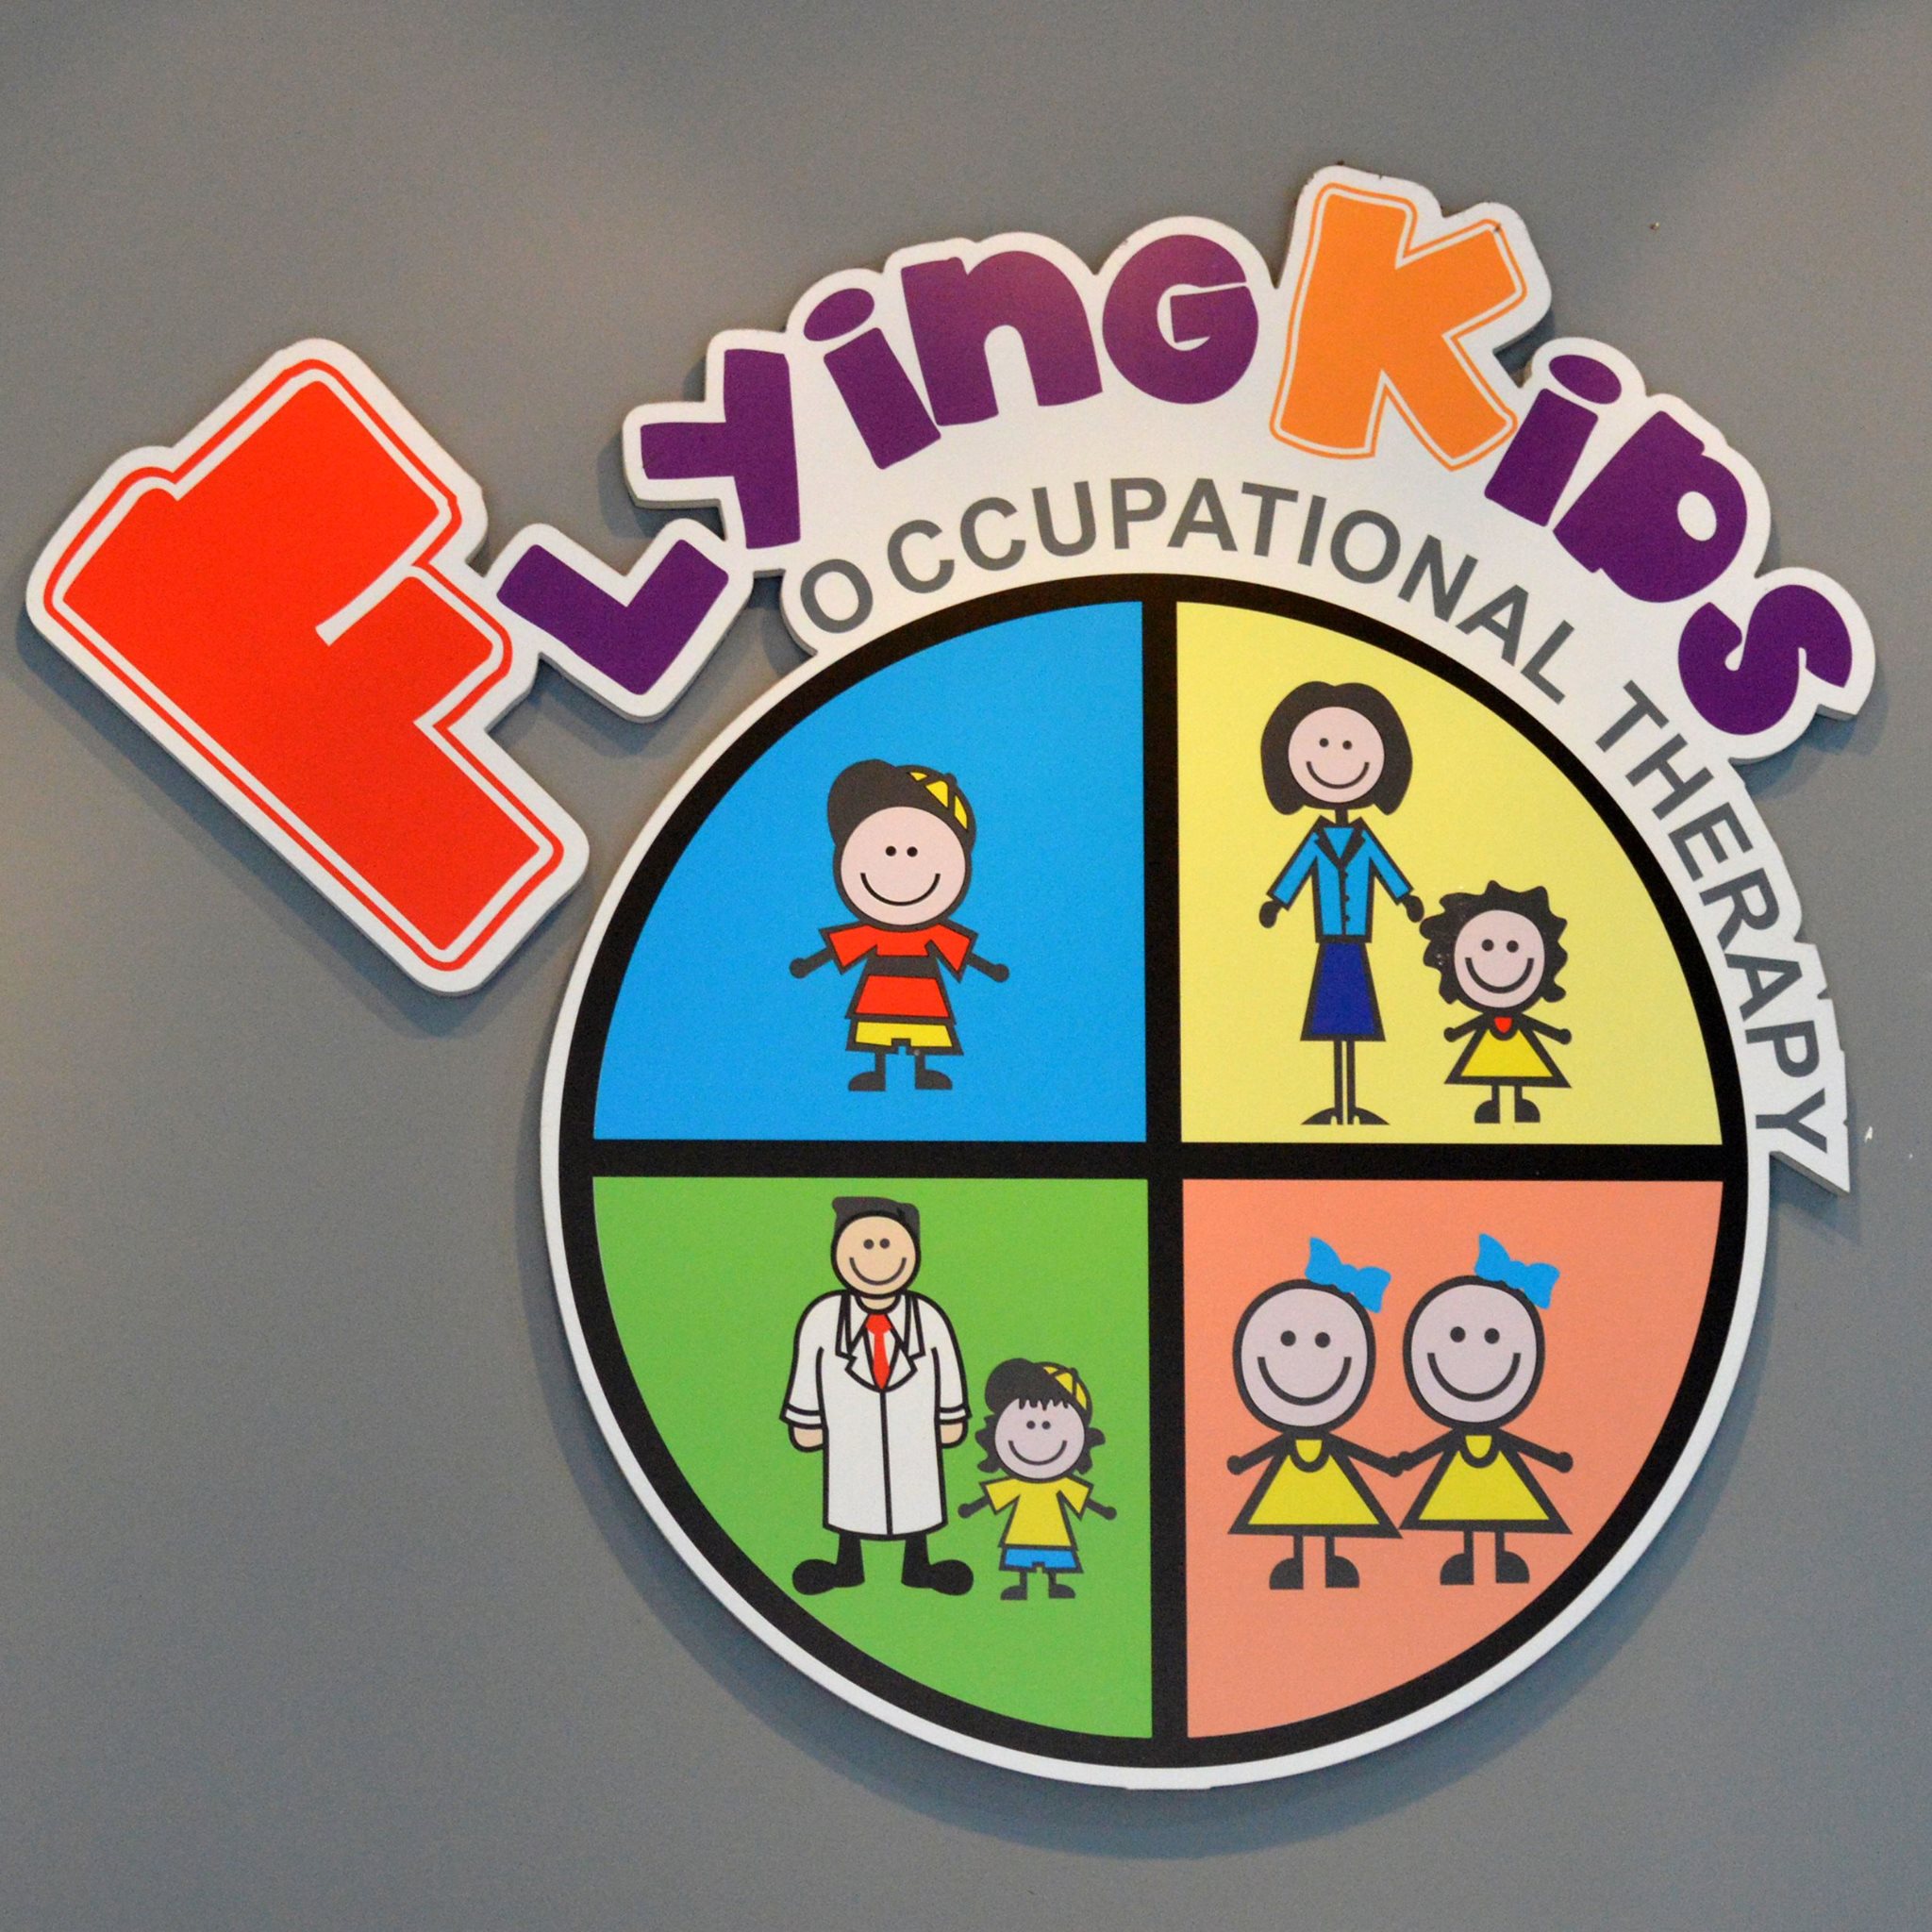 The Official Flying Kids Occupational Therapy